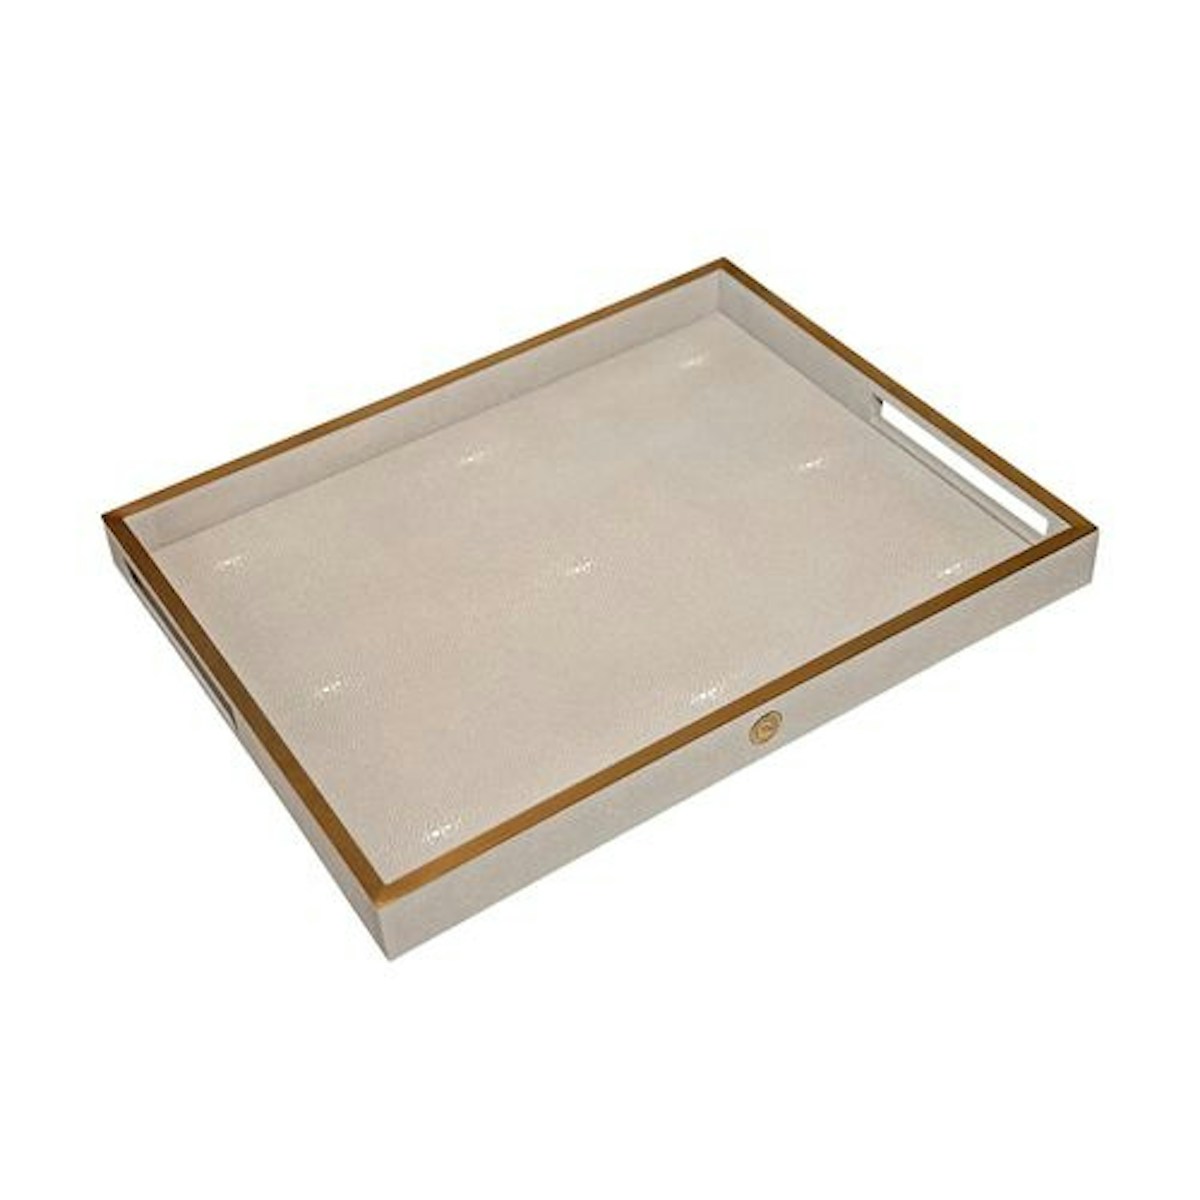 Shagreen Natural Rectangular Tray - 21 Best Decorative Trays To Buy For Your Tabletop - LuxDeco.com